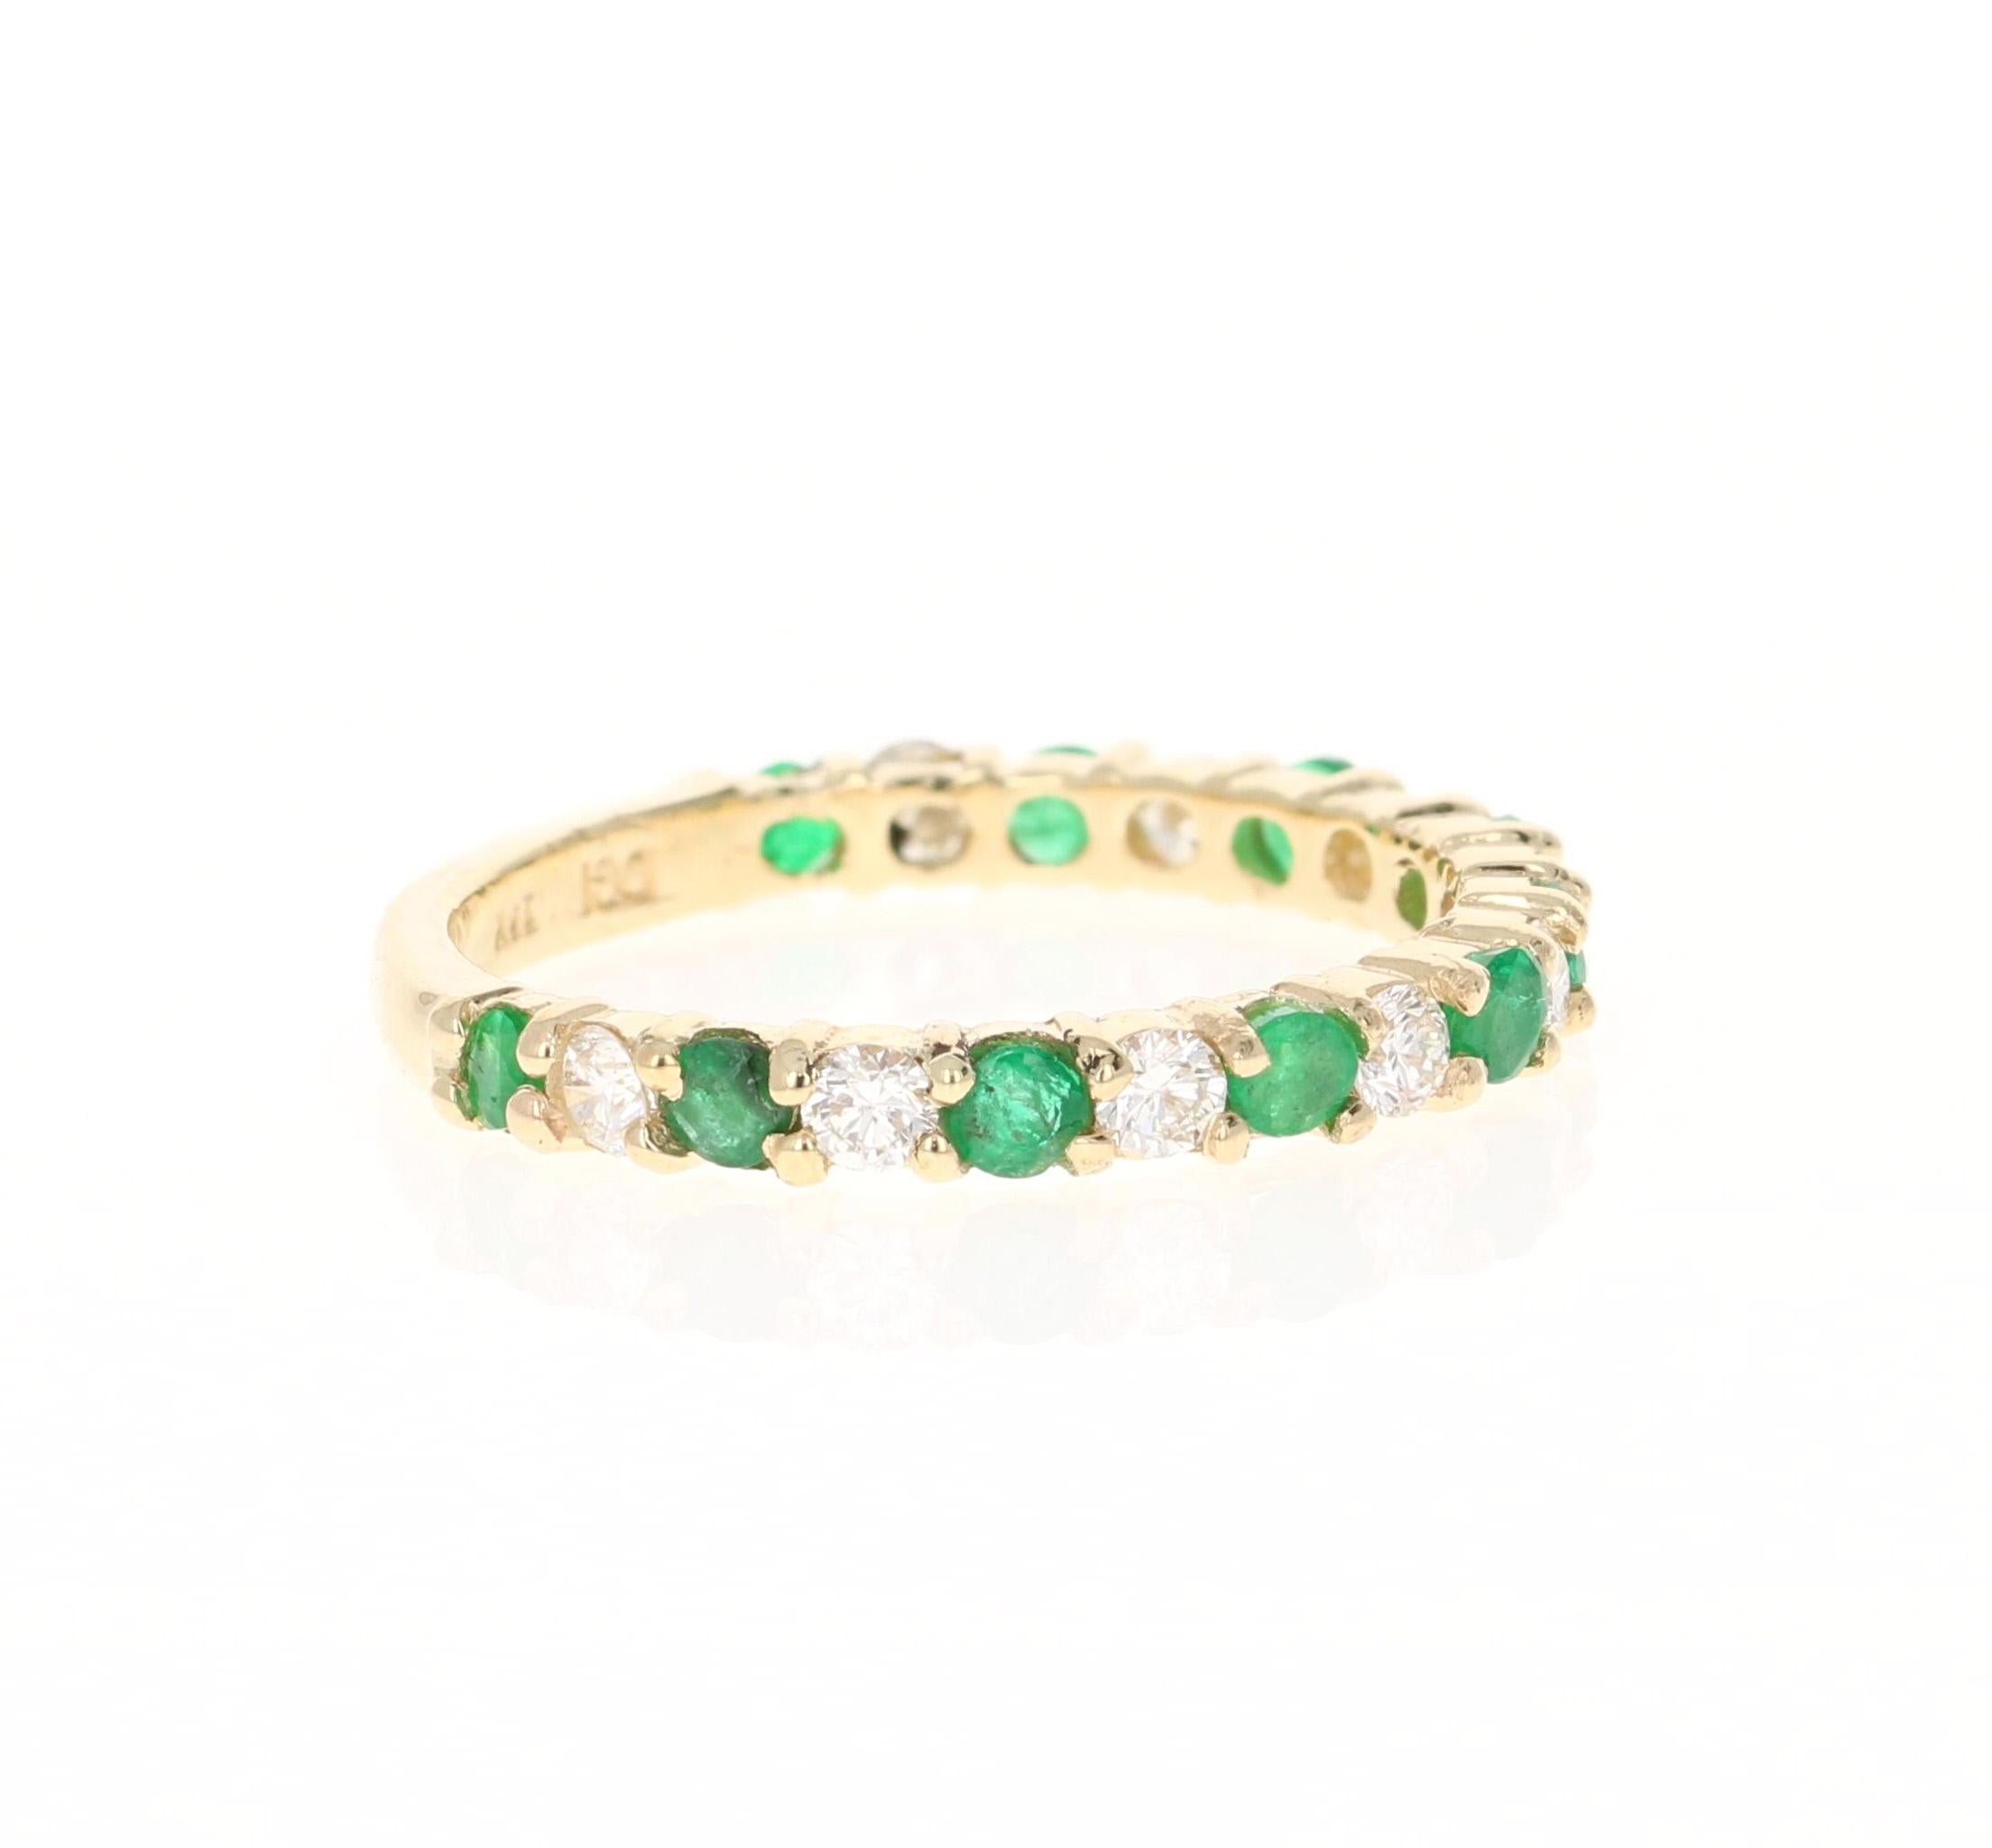 There are 10 Round Cut Emeralds that weigh 0.55 Carats and 9 Round Cut Diamonds that weigh 0.45 carats (Clarity: VS, Color: H).  The total Carat Weight of the band is 1.00 Carats. The band is made in 14K Yellow Gold and weighs approximately 2.9